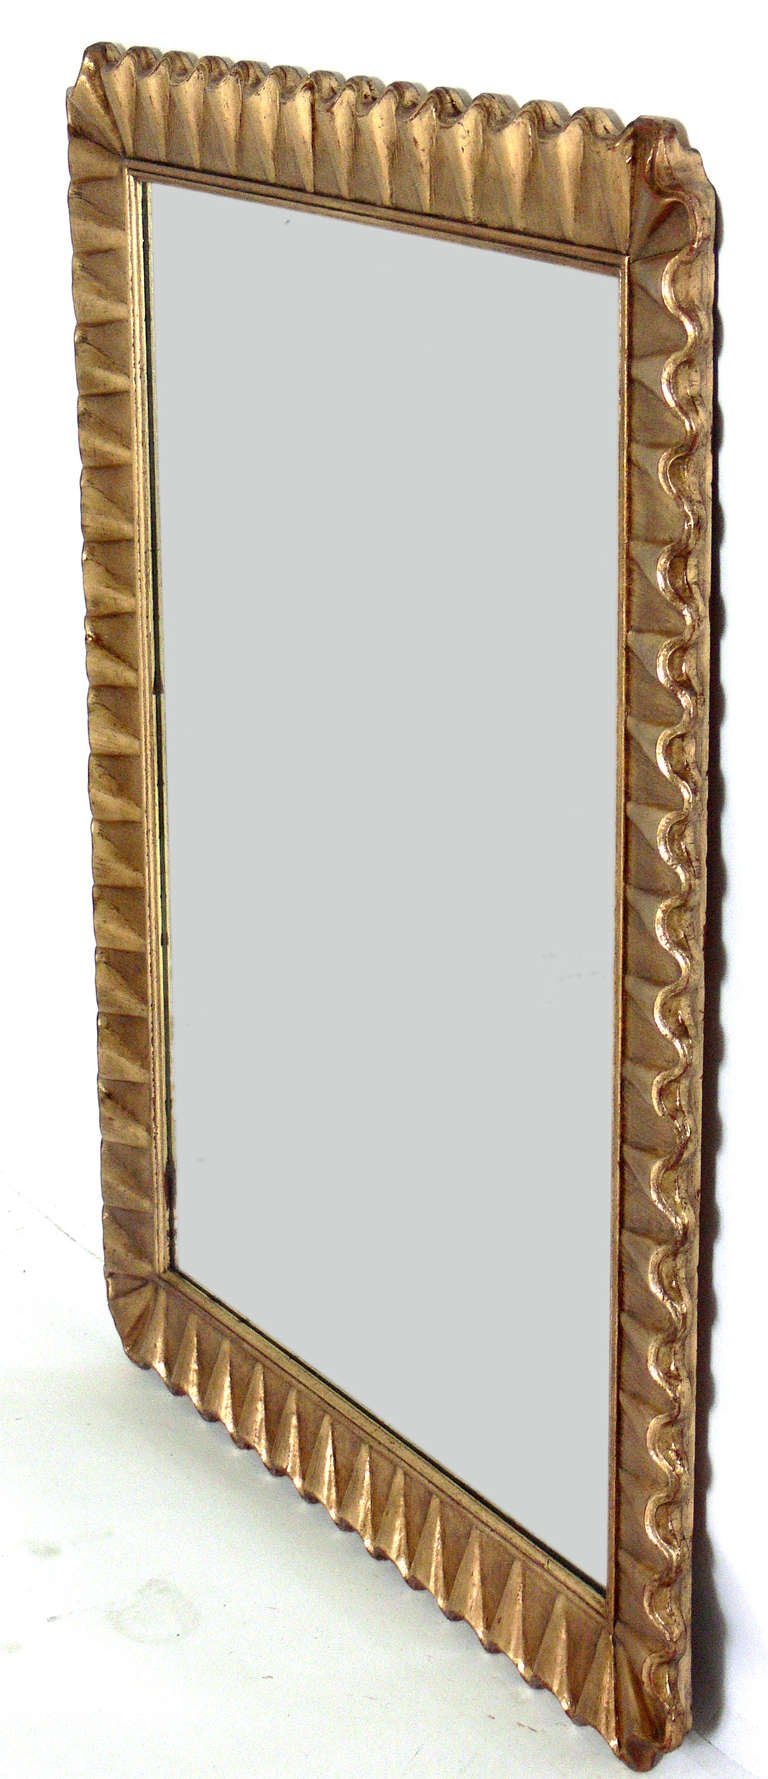 Gold Leaf Scalloped Mirror, American, circa 1940's. Elegant undulating form. Retains wonderful patina to both the gold leafed frame and the original mirrored glass. Executed in gold leafed plaster and wood.